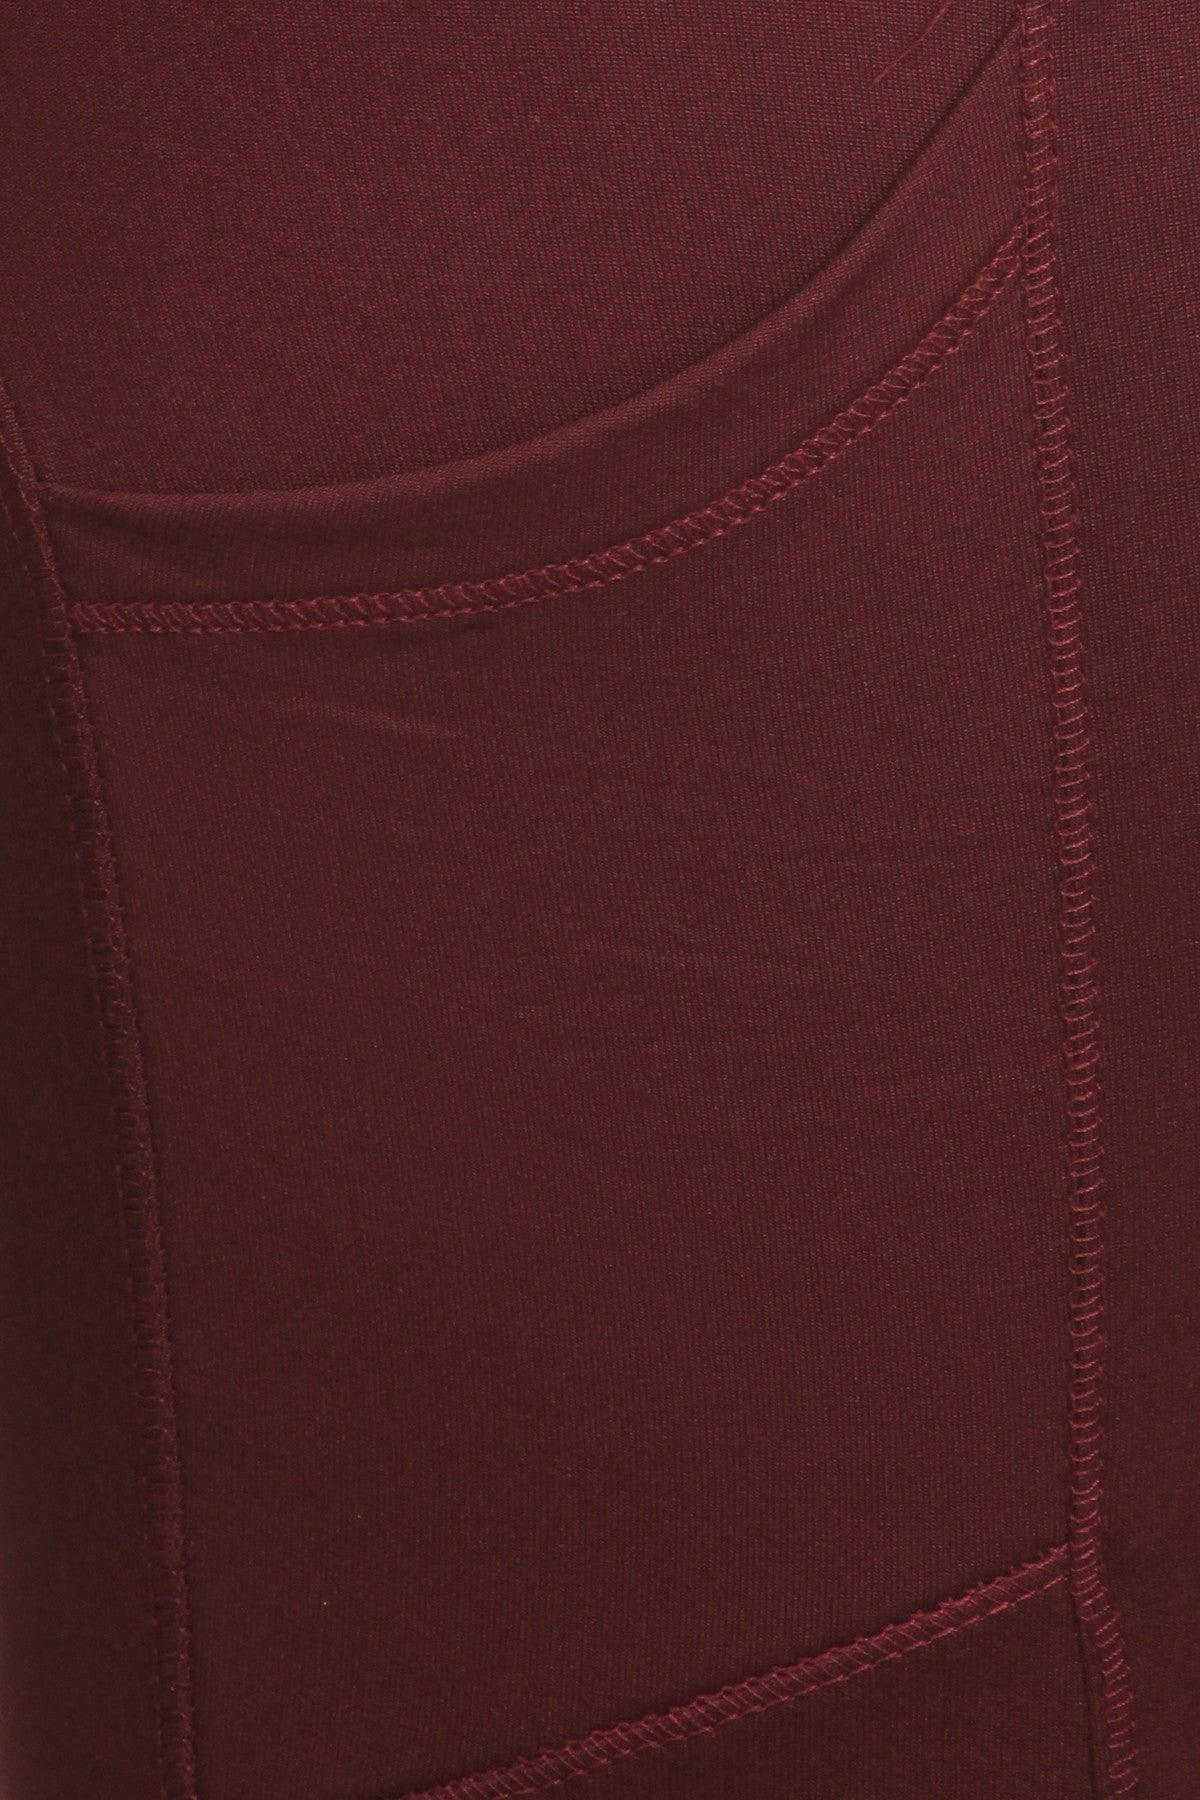 Plus Size Solid Fleece Lined Sports Leggings With Side Pockets - Burgundy